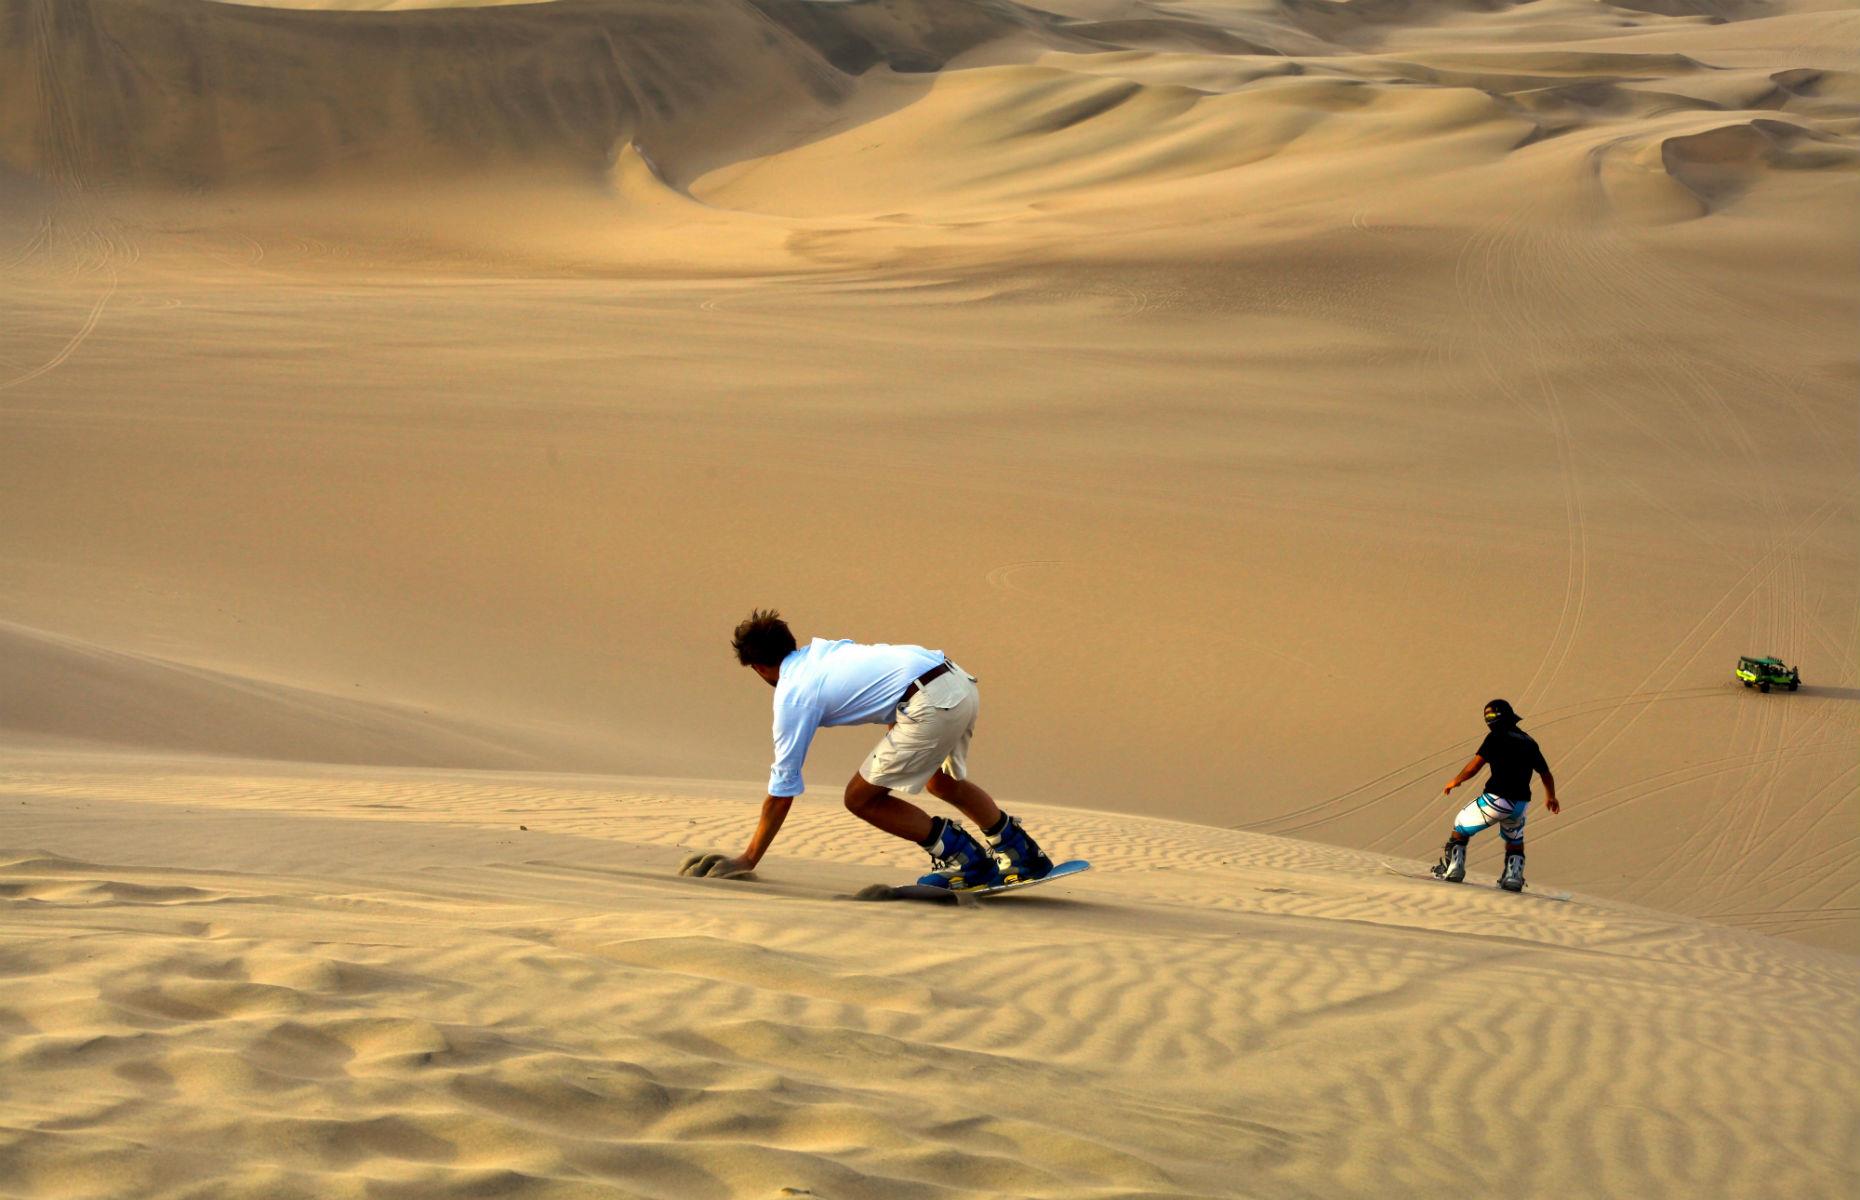 <p>Who needs snow when you have sand? The desert oasis of Huacachina in southwestern Peru is the perfect place to strap on a sandboard and put your skills to the test over the undulating sand dunes. If you’d rather sit in a vehicle, climb on board a dune buggy to take in the mesmerizing views without the adrenaline rush.</p>